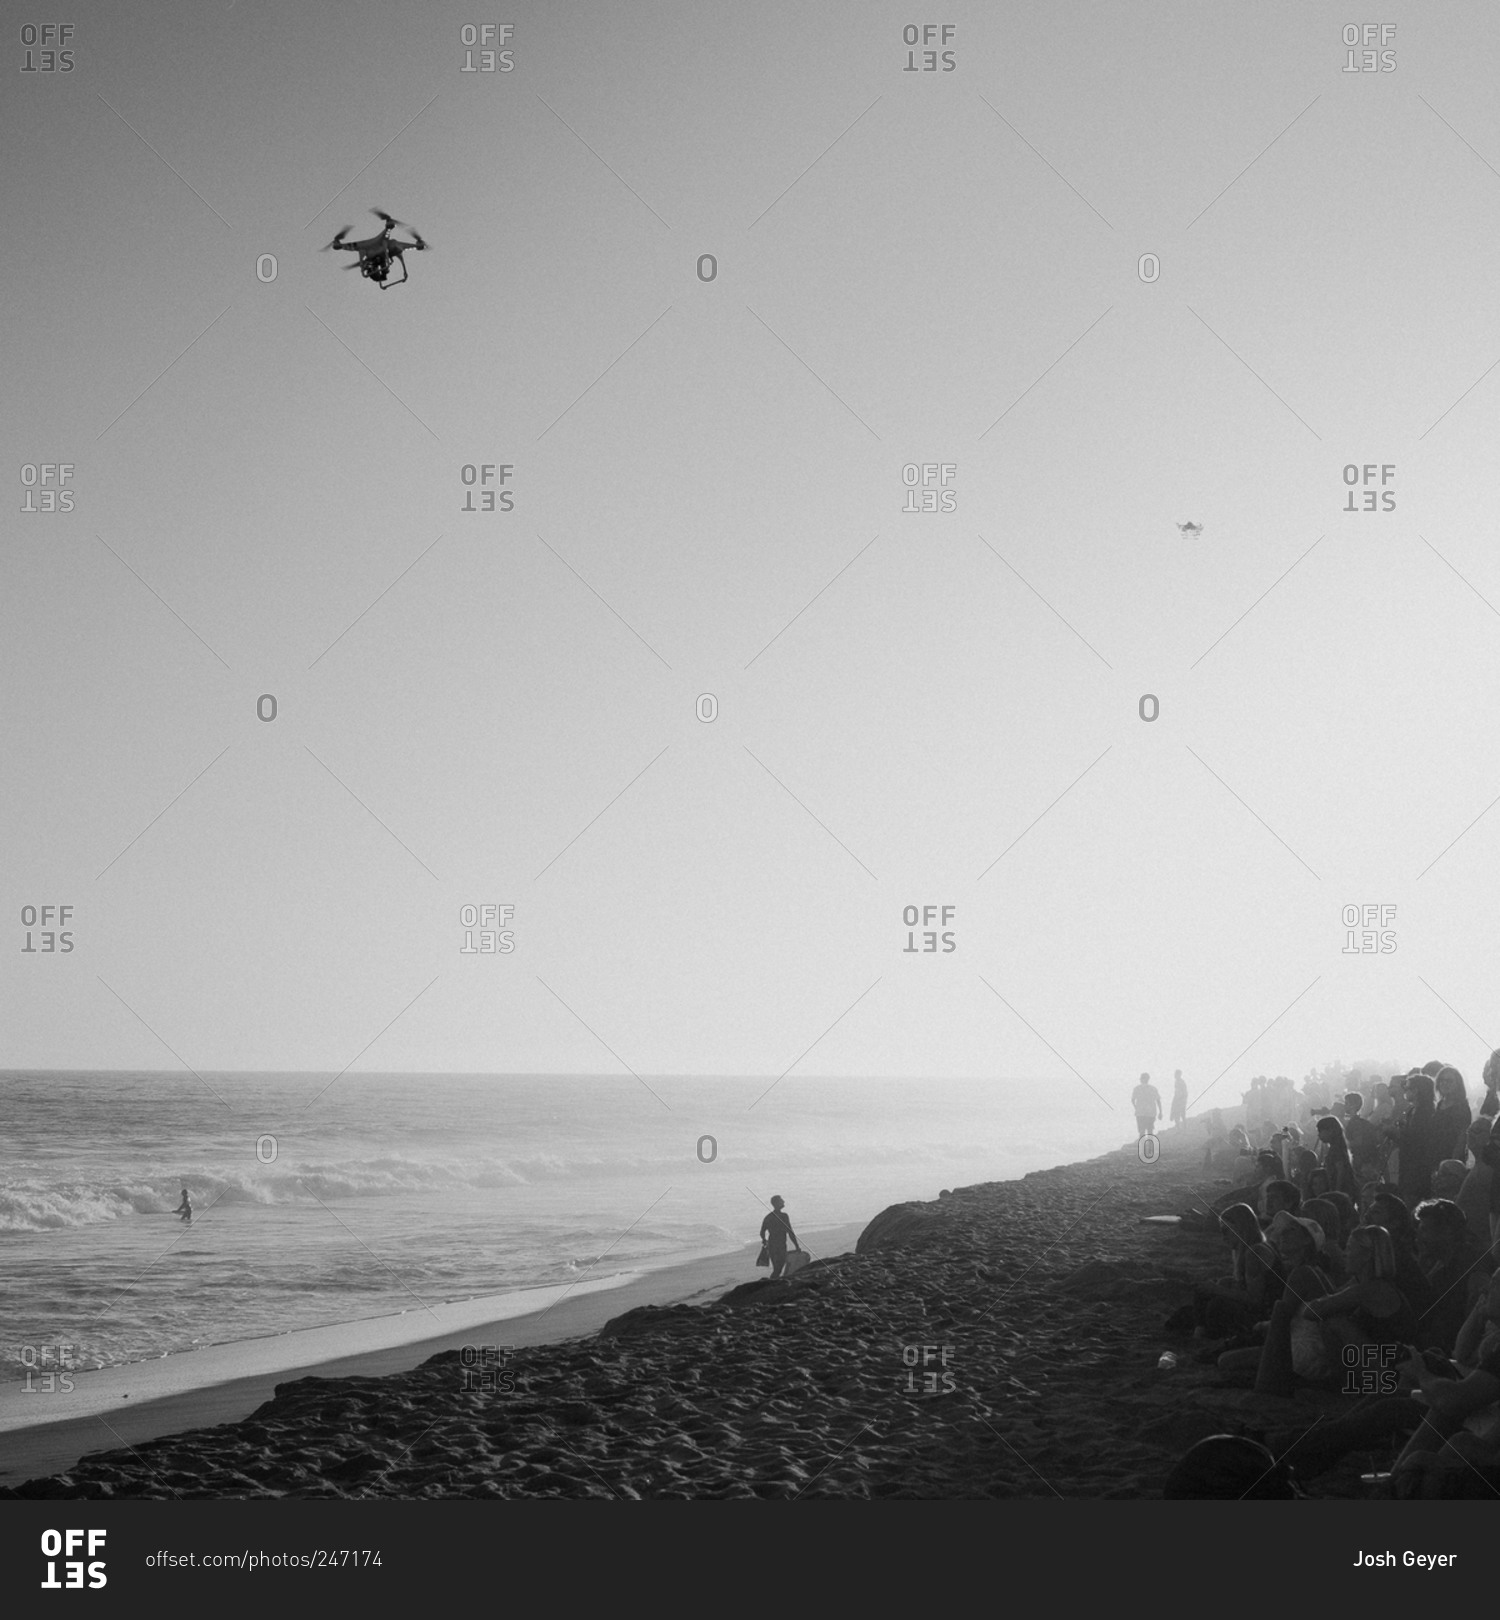 Drones in flight above a crowd sitting on beach at surf competition